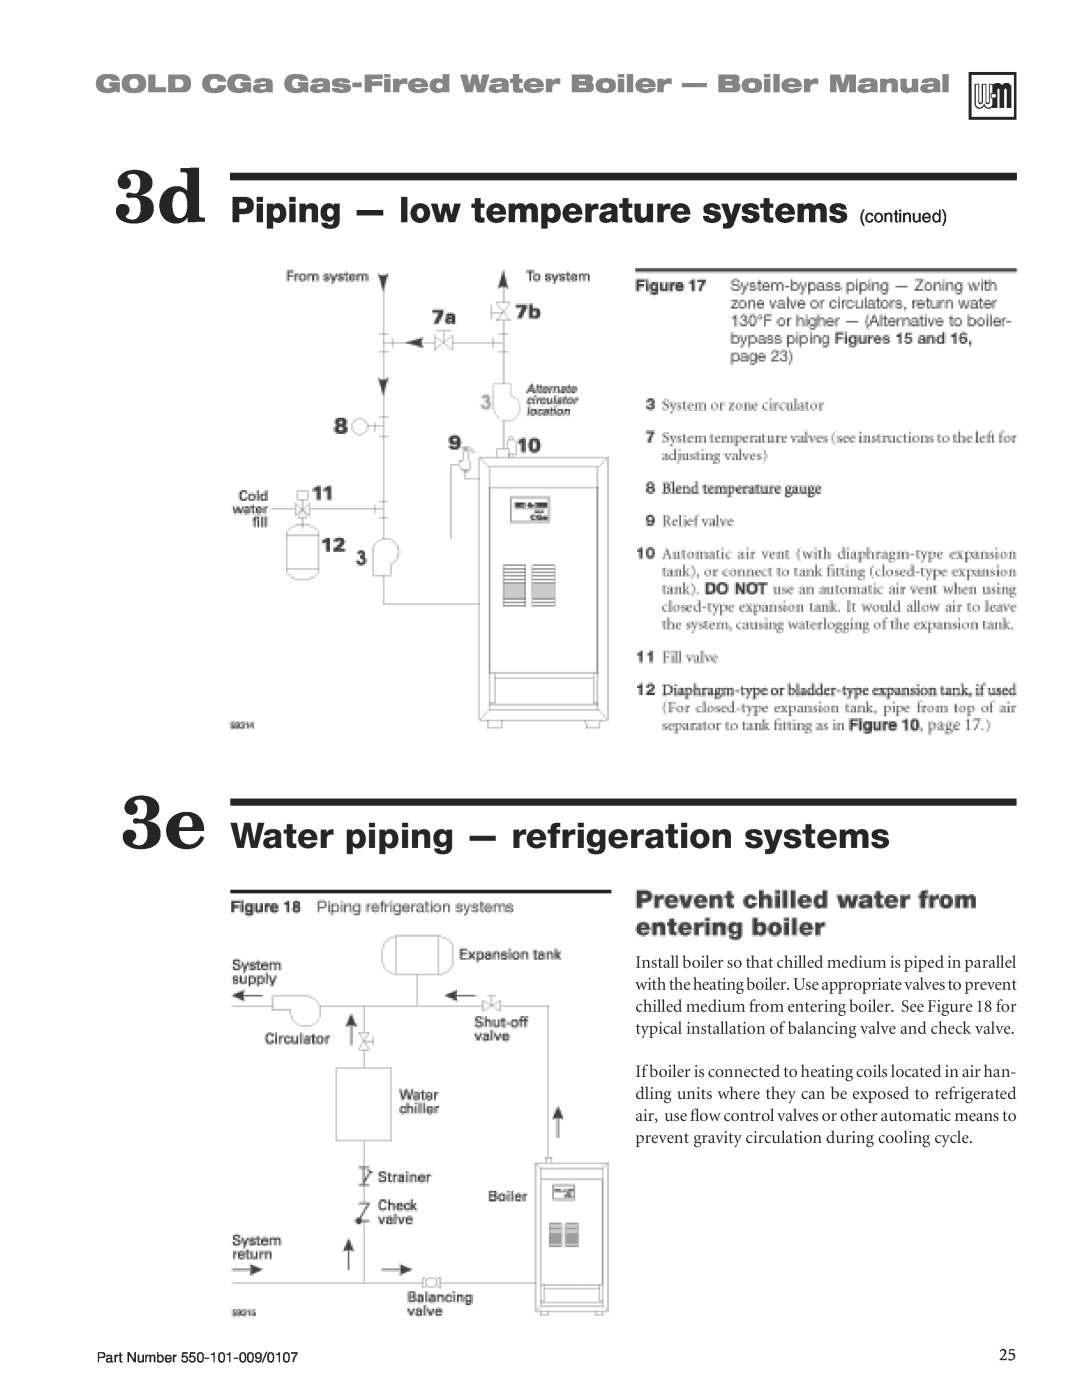 Weil-McLain CGA25SPDN manual 3e Water piping - refrigeration systems, 3d Piping - low temperature systems continued 